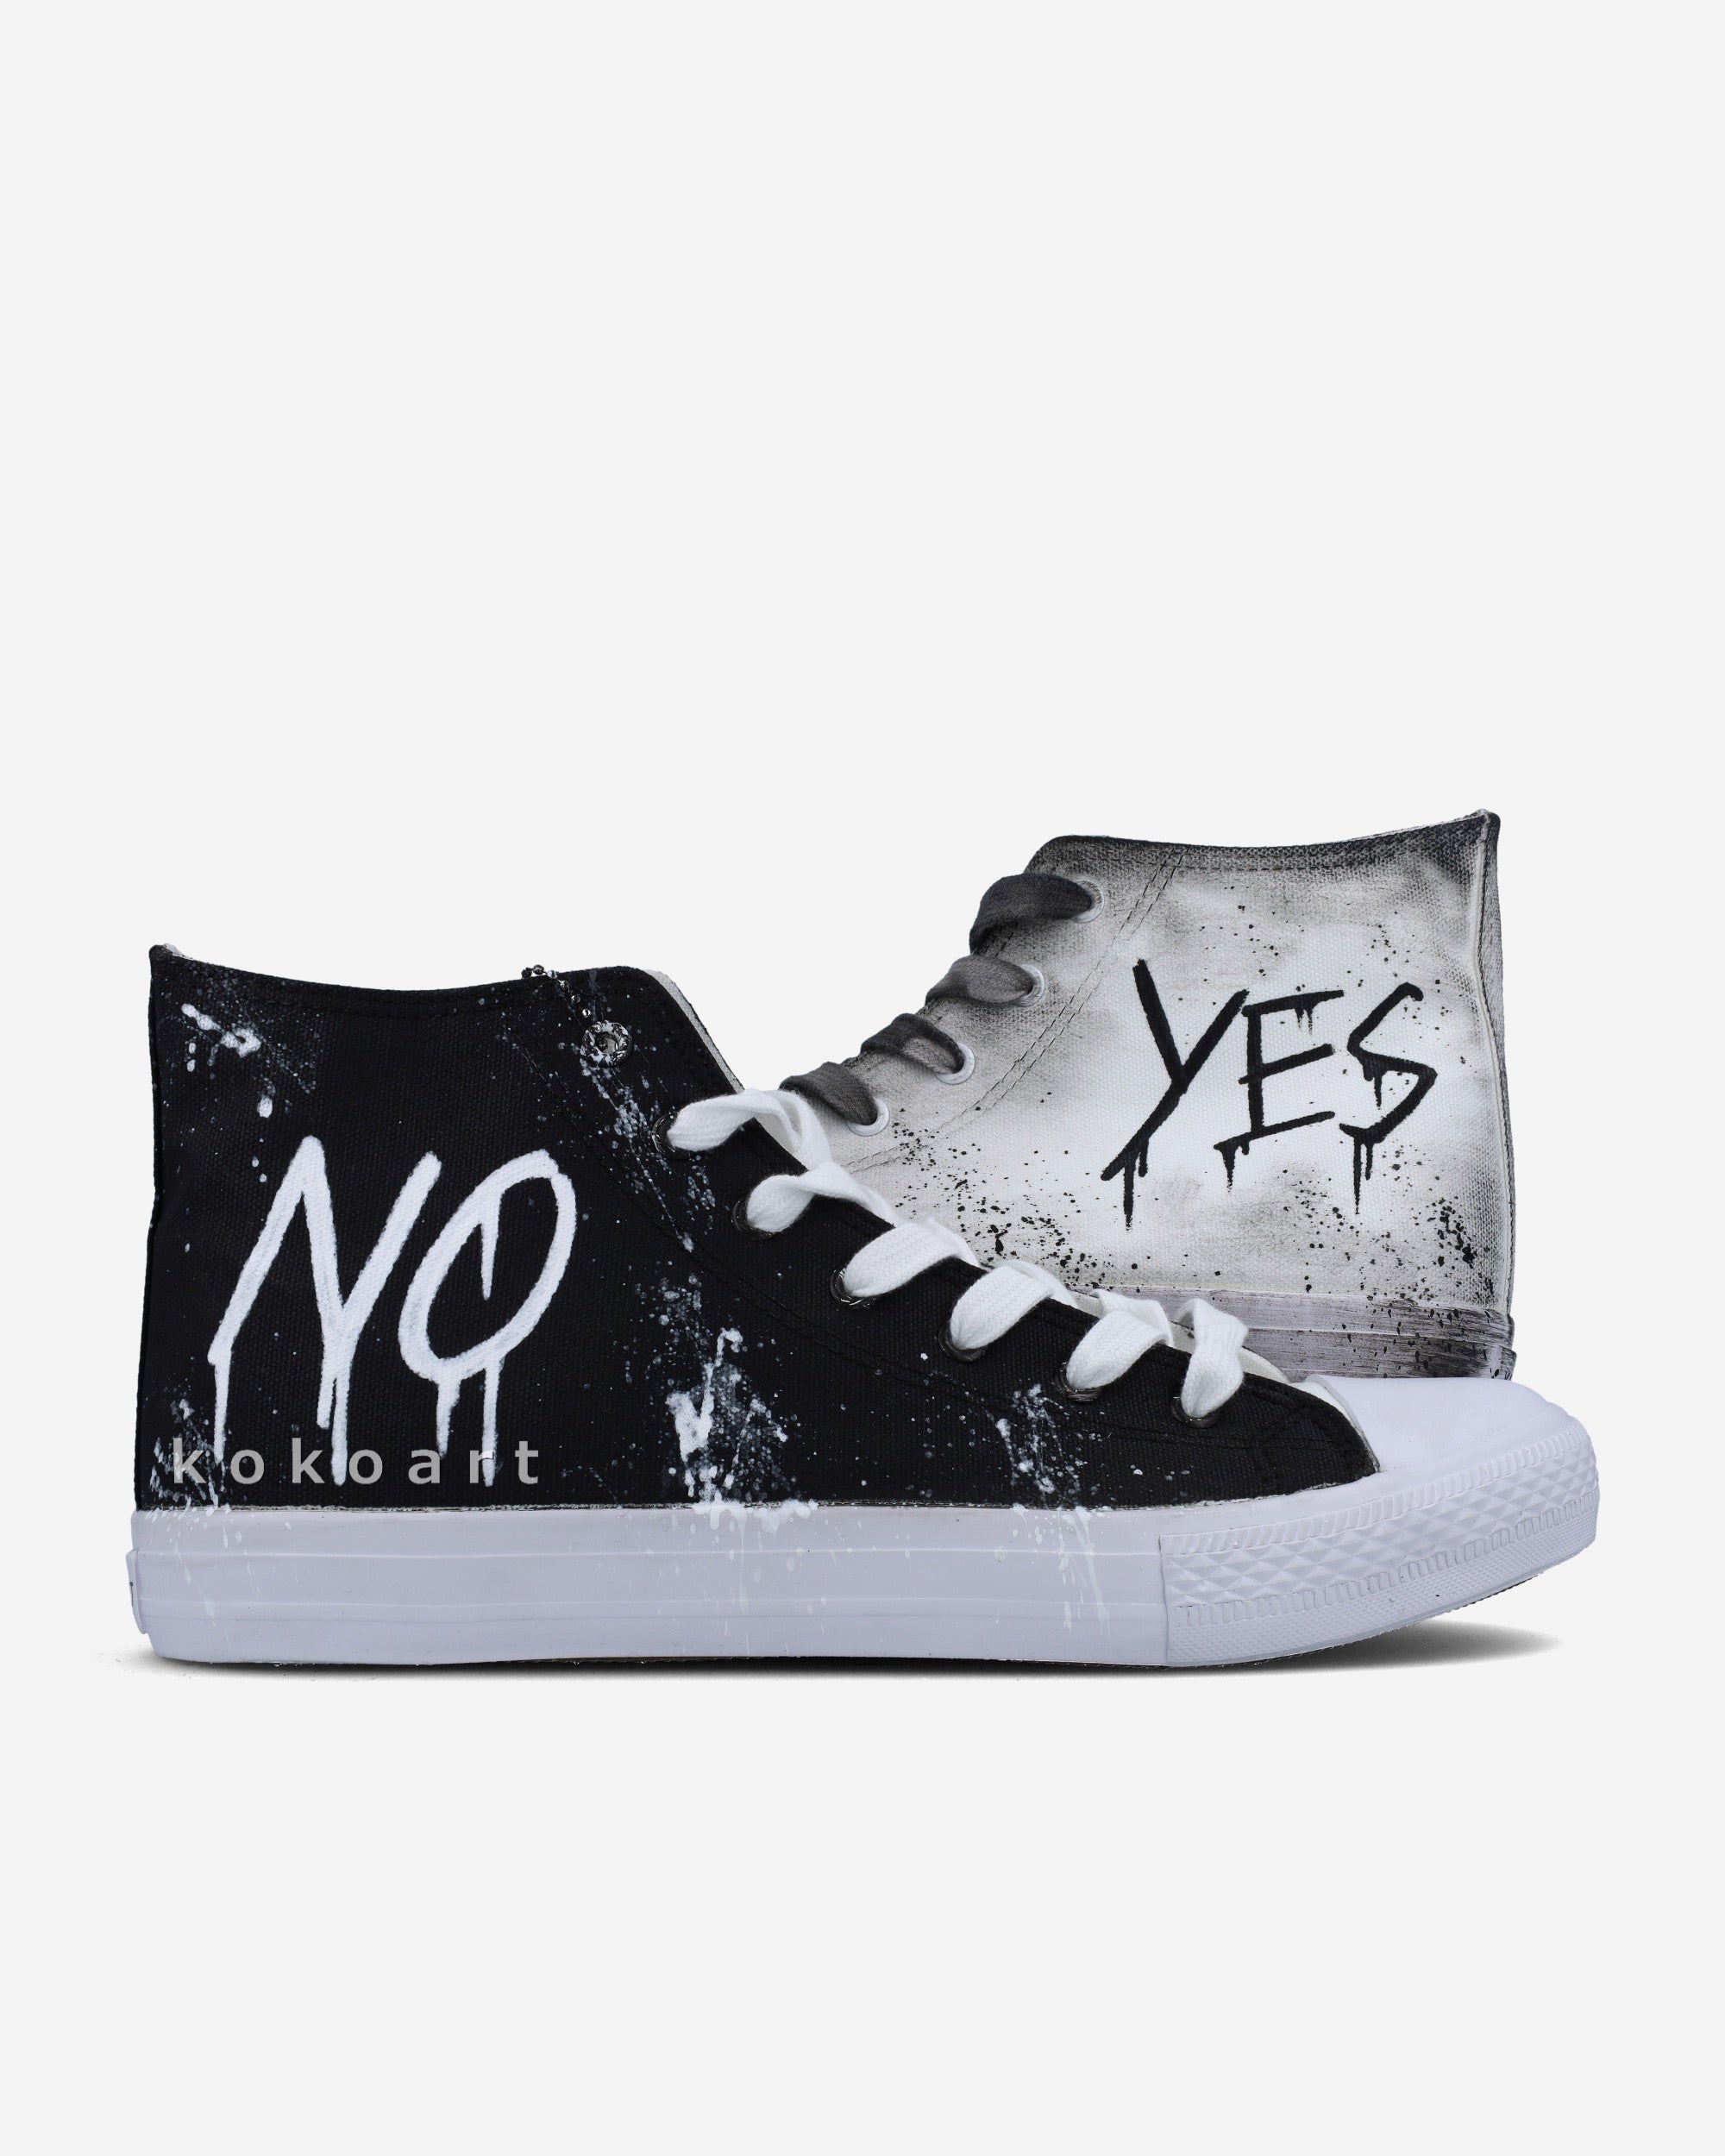 Yes No Hand Painted Shoes